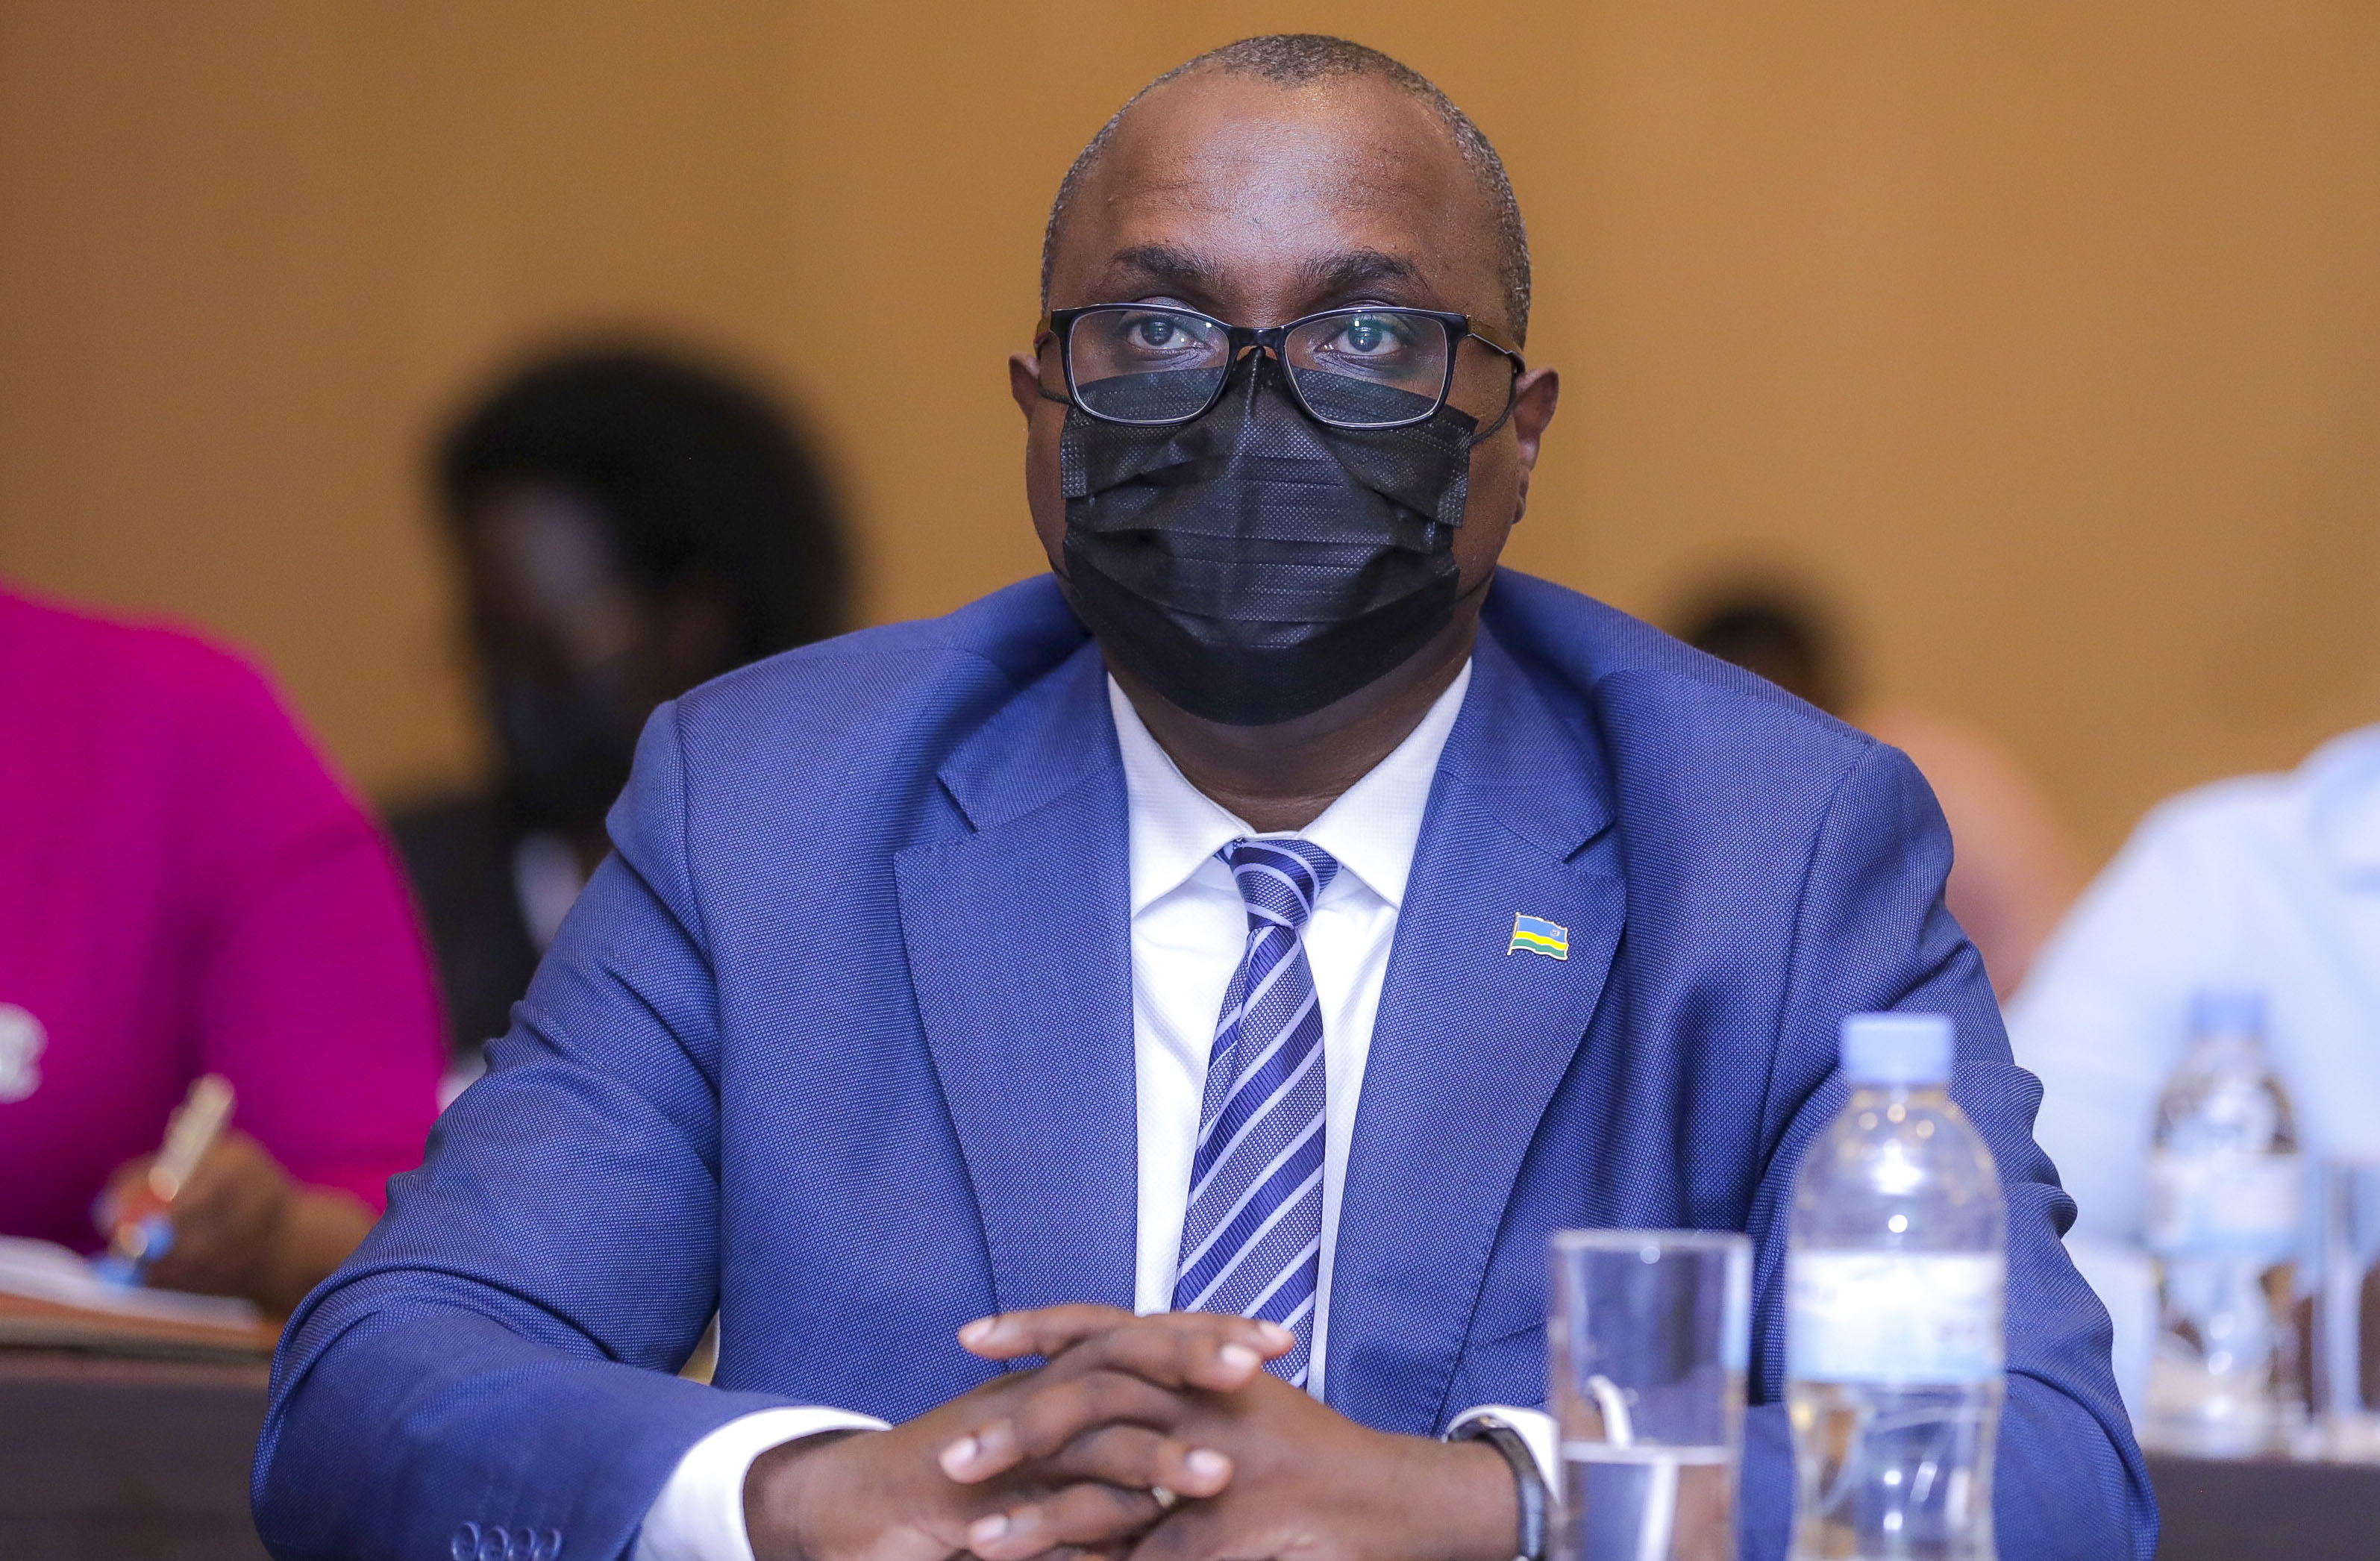 Jean Chrysostome Ngabitsinze, Minister of State at the Ministry of Agriculture and Animal Resources, during a meeting in Kigali recently. / Photo: Courtesy.